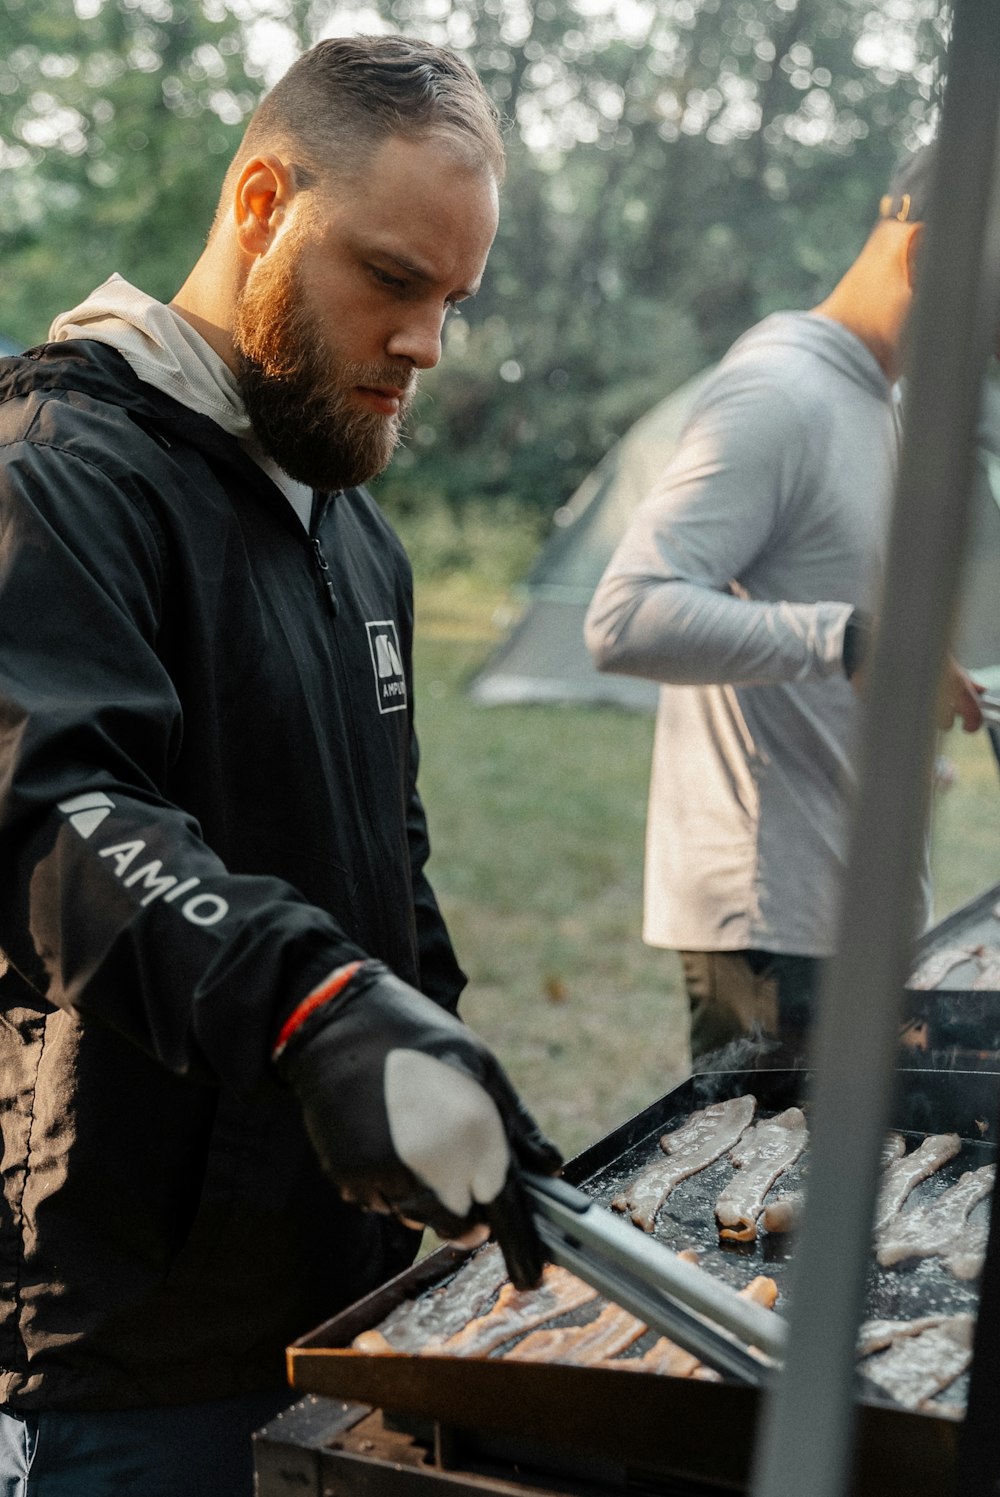 a man grilling food on a grill outside